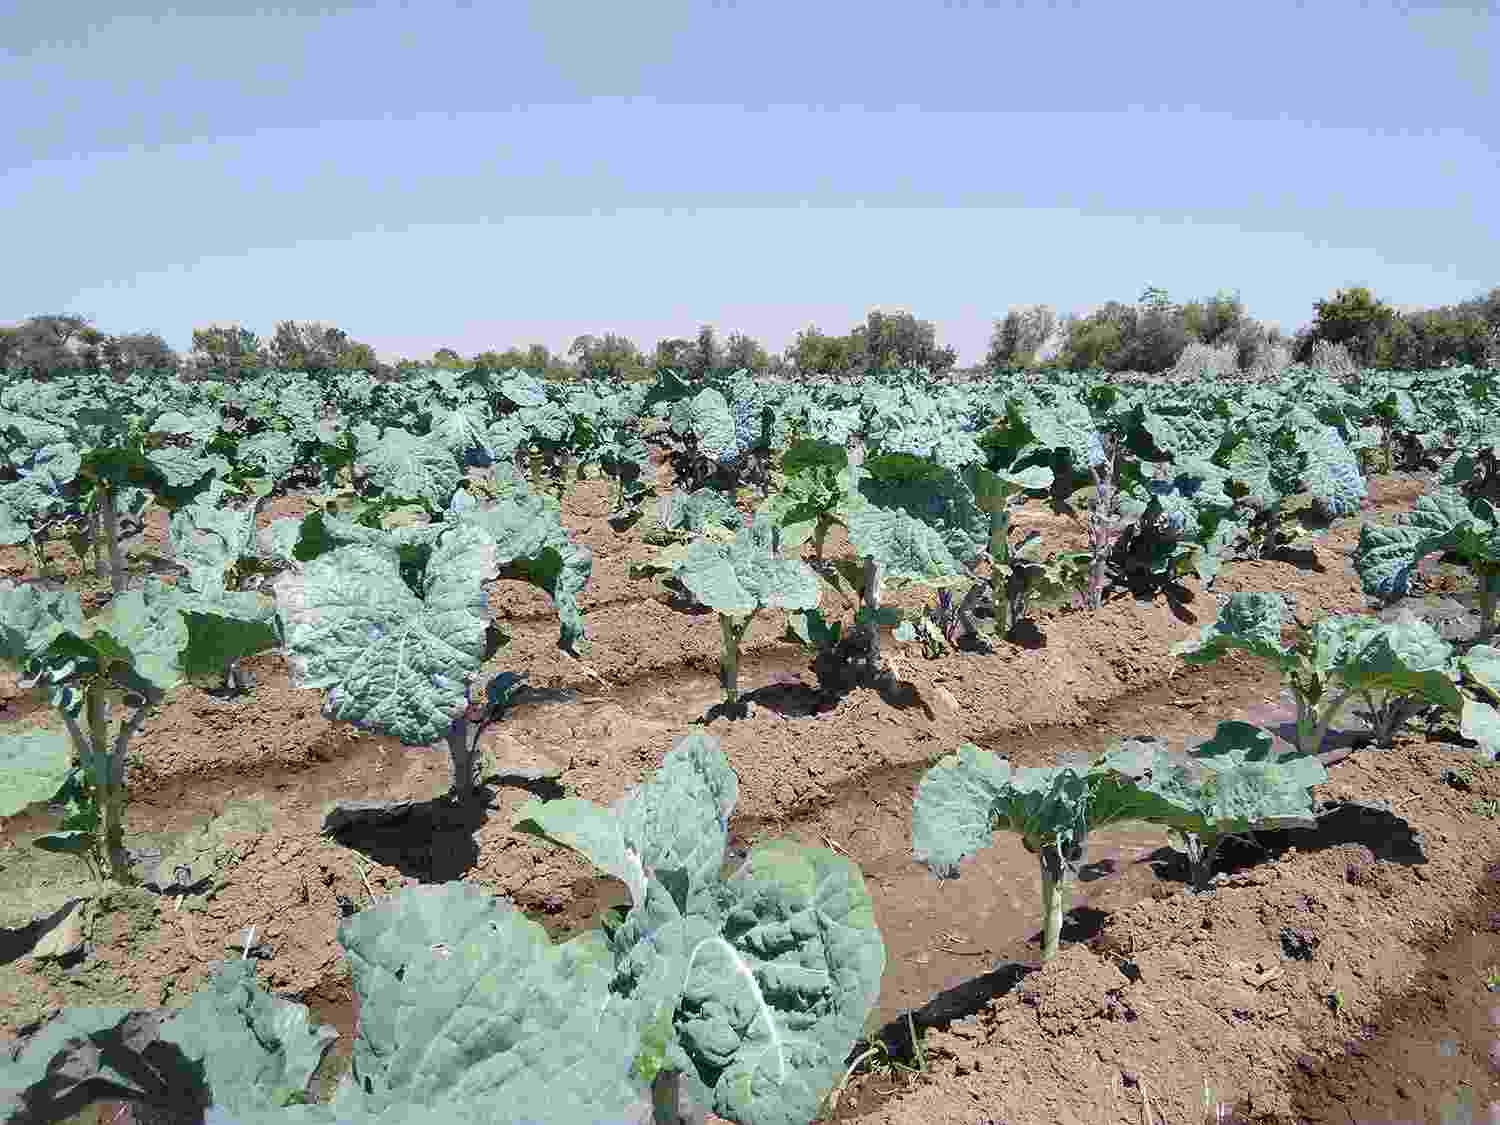 Close up of young kale plants growing in rows on an irrigated farm